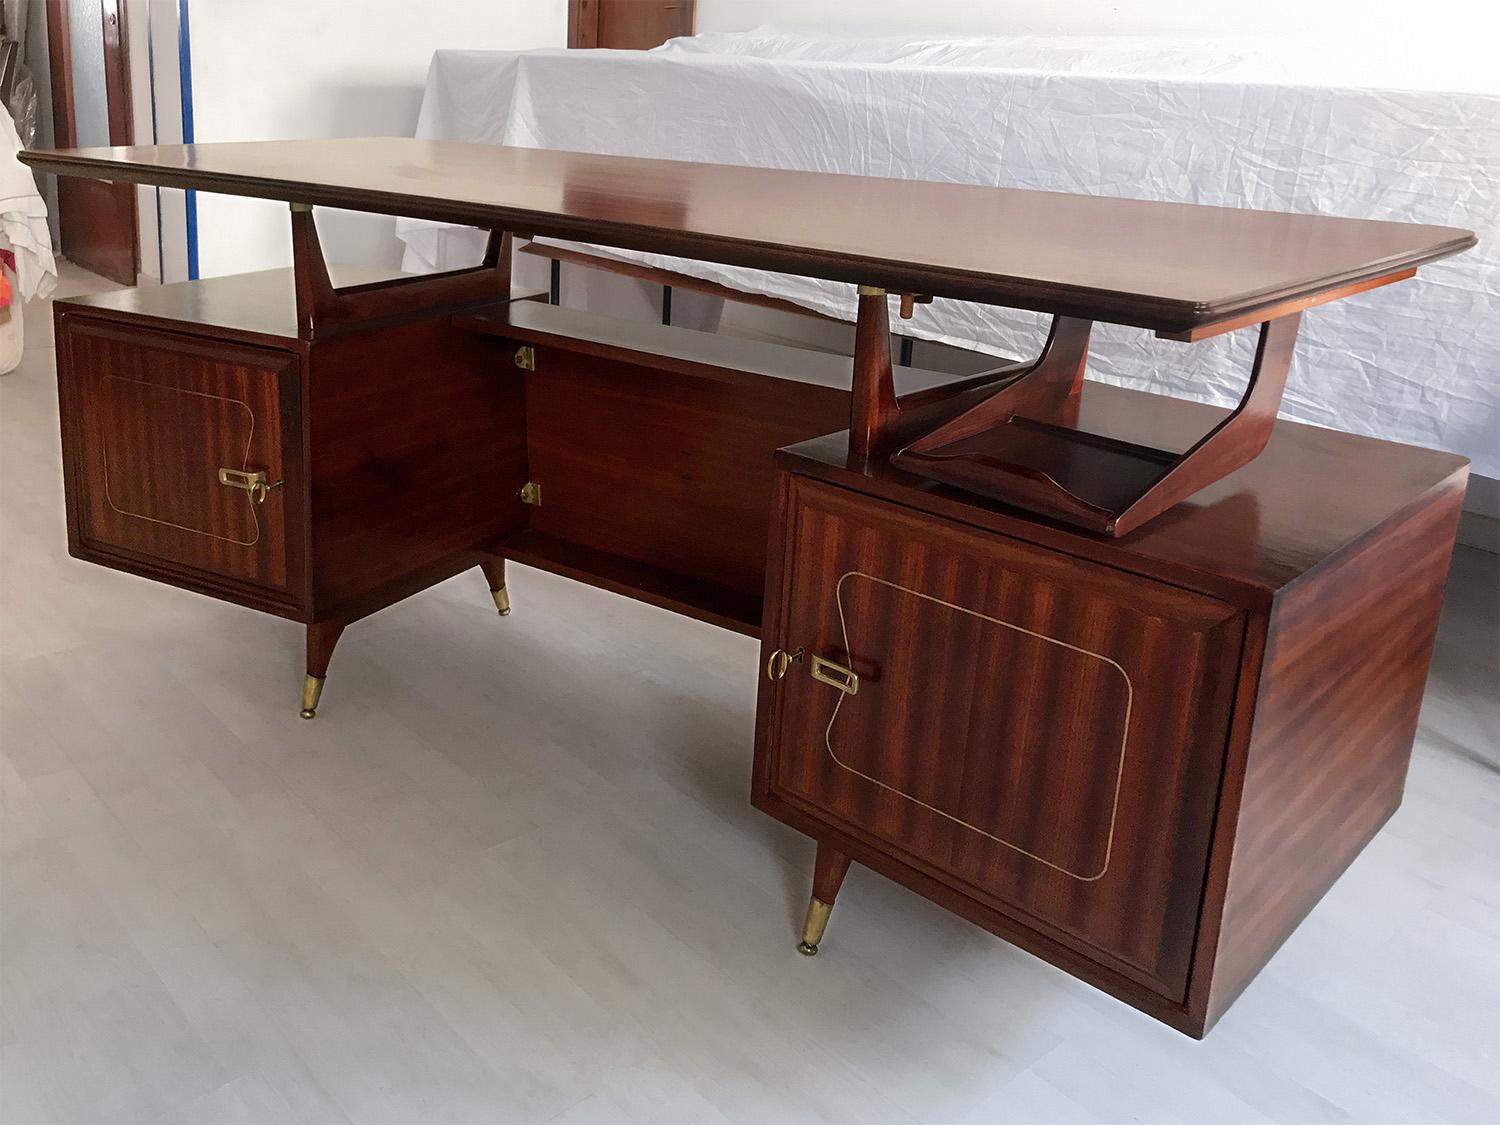 Amazing and unique design for this Italian executive Desk of the 1950s, attributed to La Permanente Mobili Cantù, with the structure in mahogany wood veneer finished with brass details.
The side compartments are lockable and opening the doors reveal